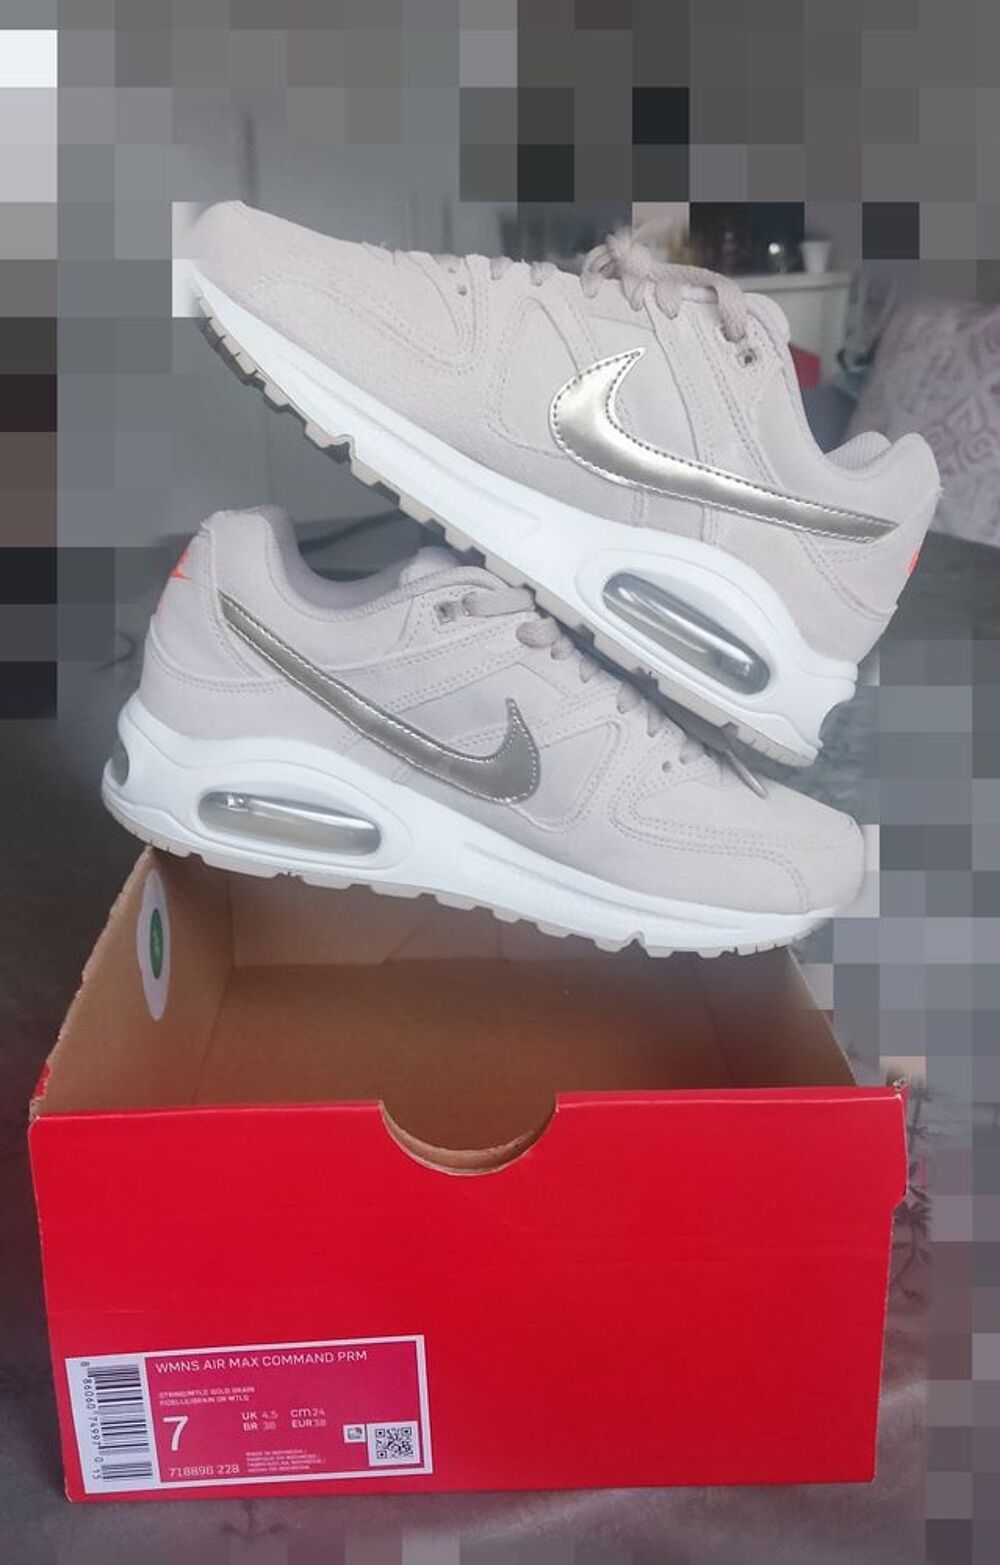 Nike Air Max Command string metallic Neuve Taille 38 femme Chaussures